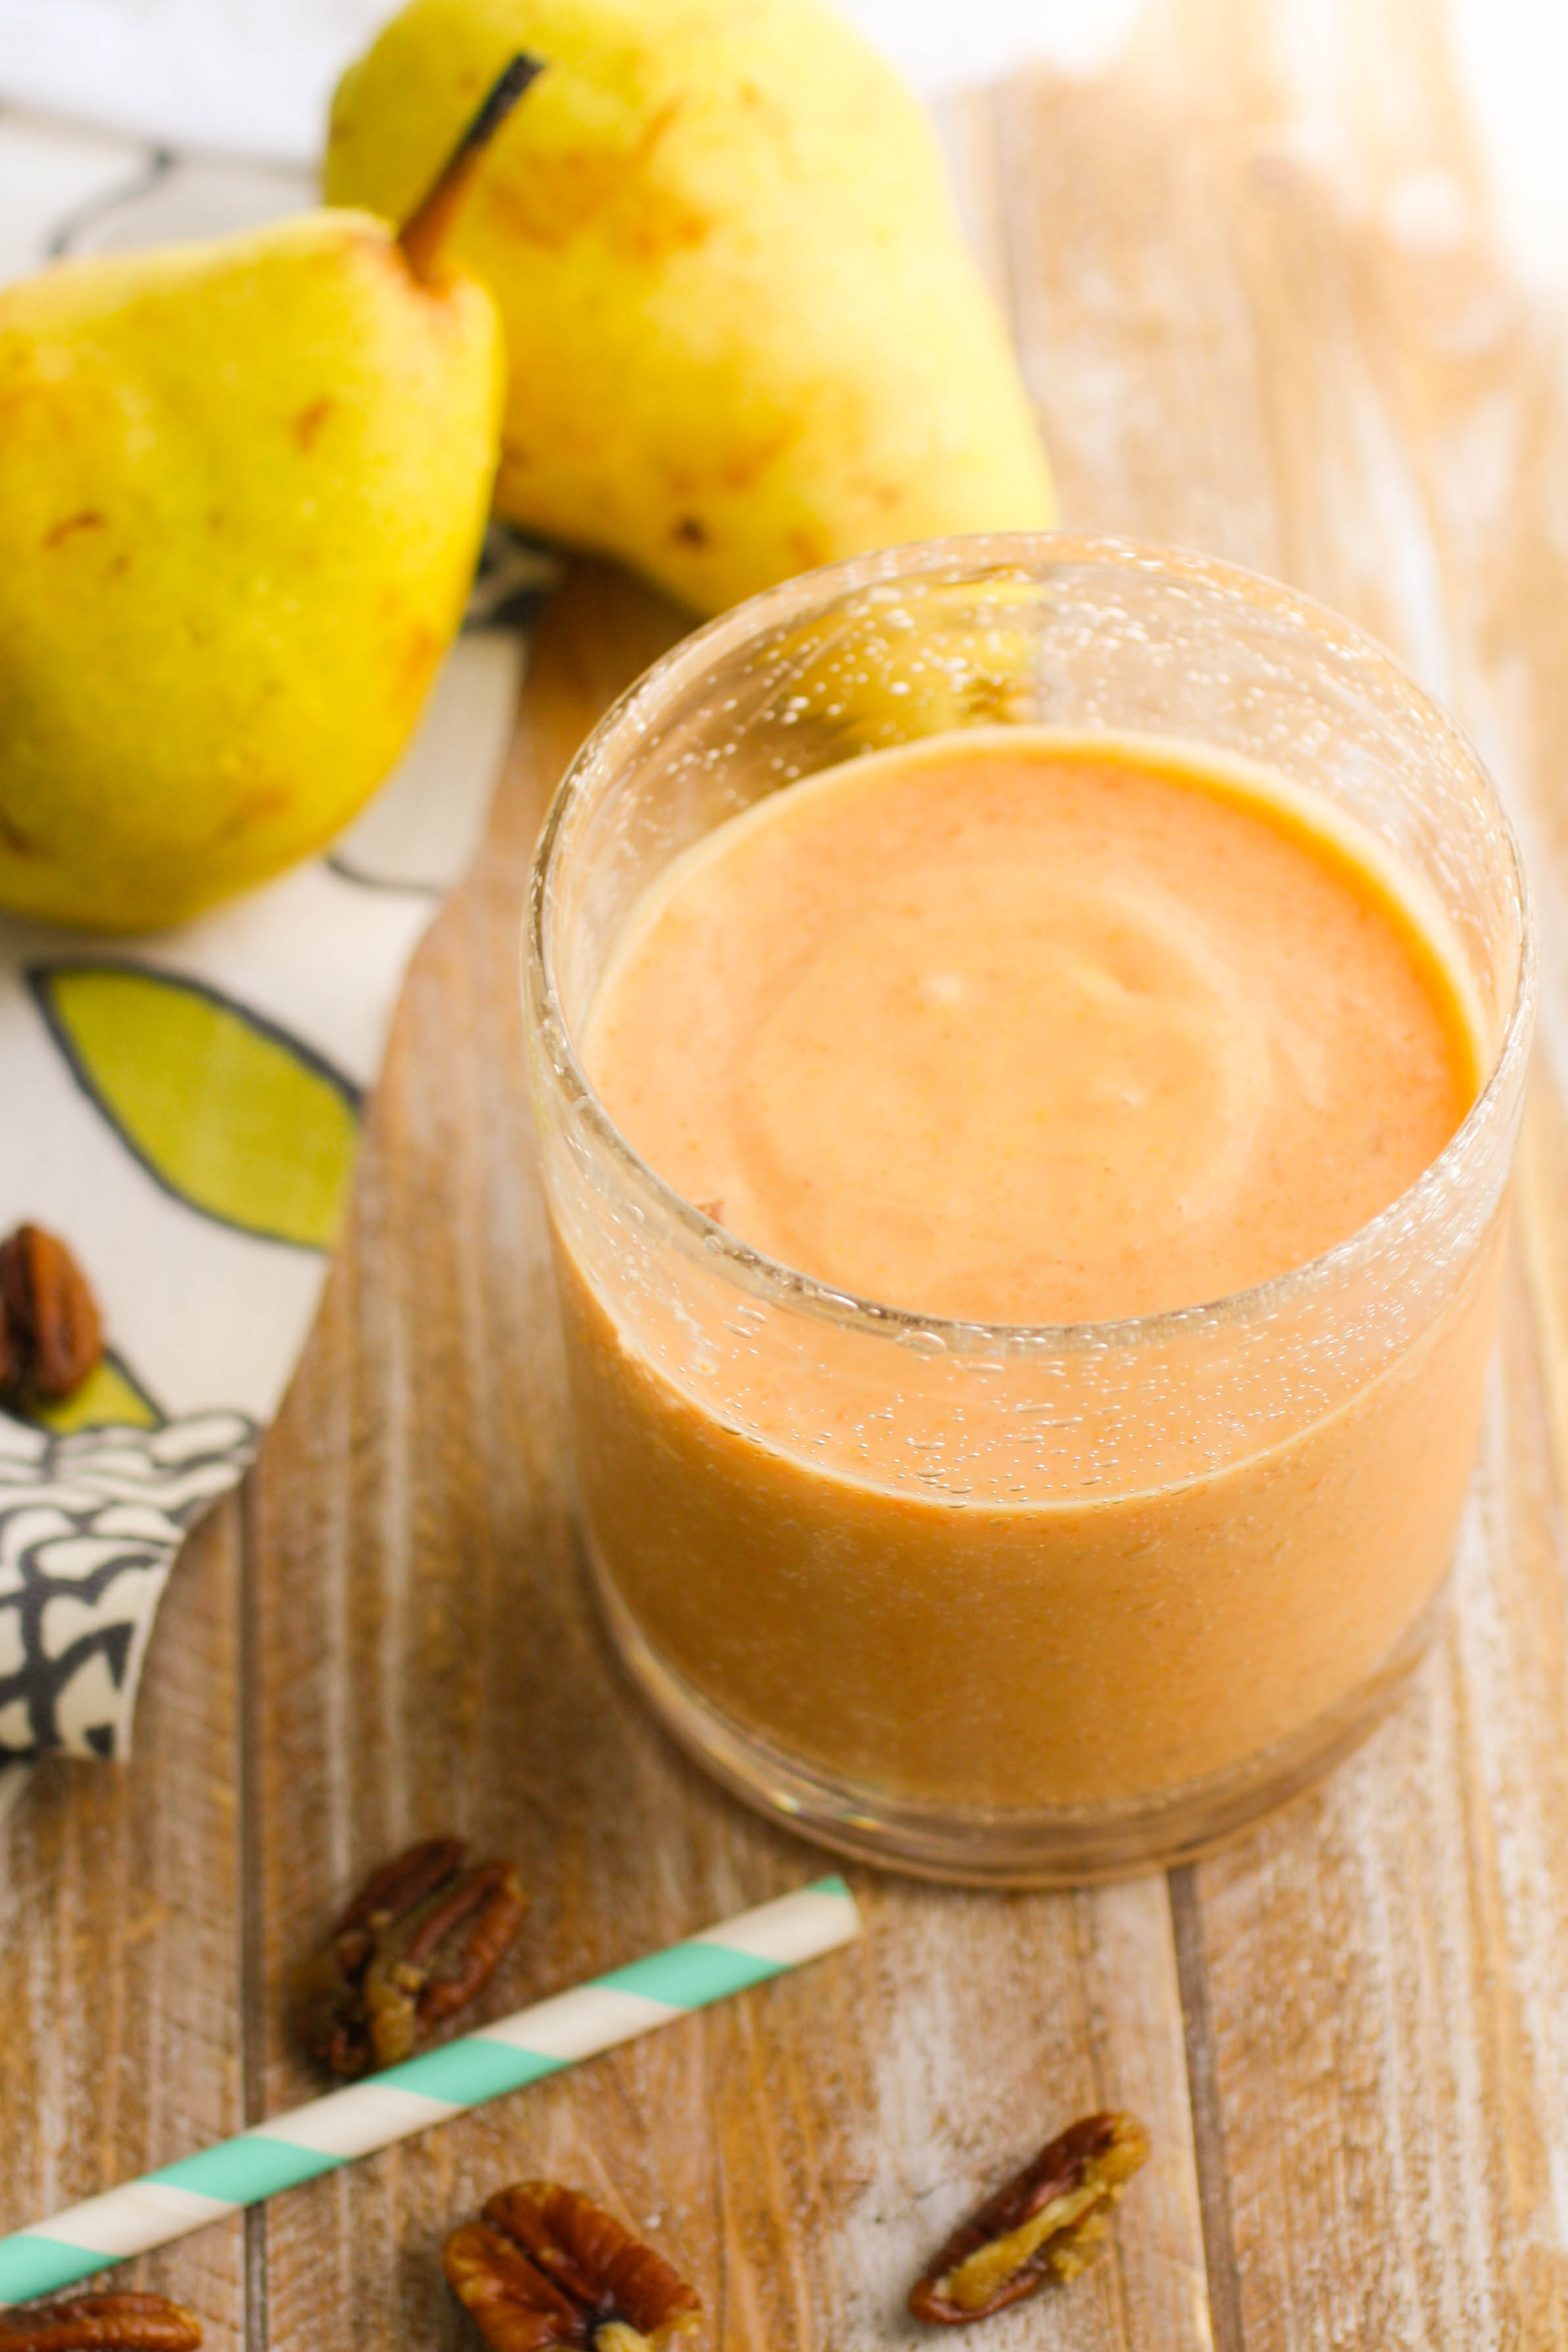 Sweet Potato-Pear Smoothies with Candied Pecans make a tasty and filling breakfast (and are good for dessert, too)! These fall-inspired smoothies are delicious!